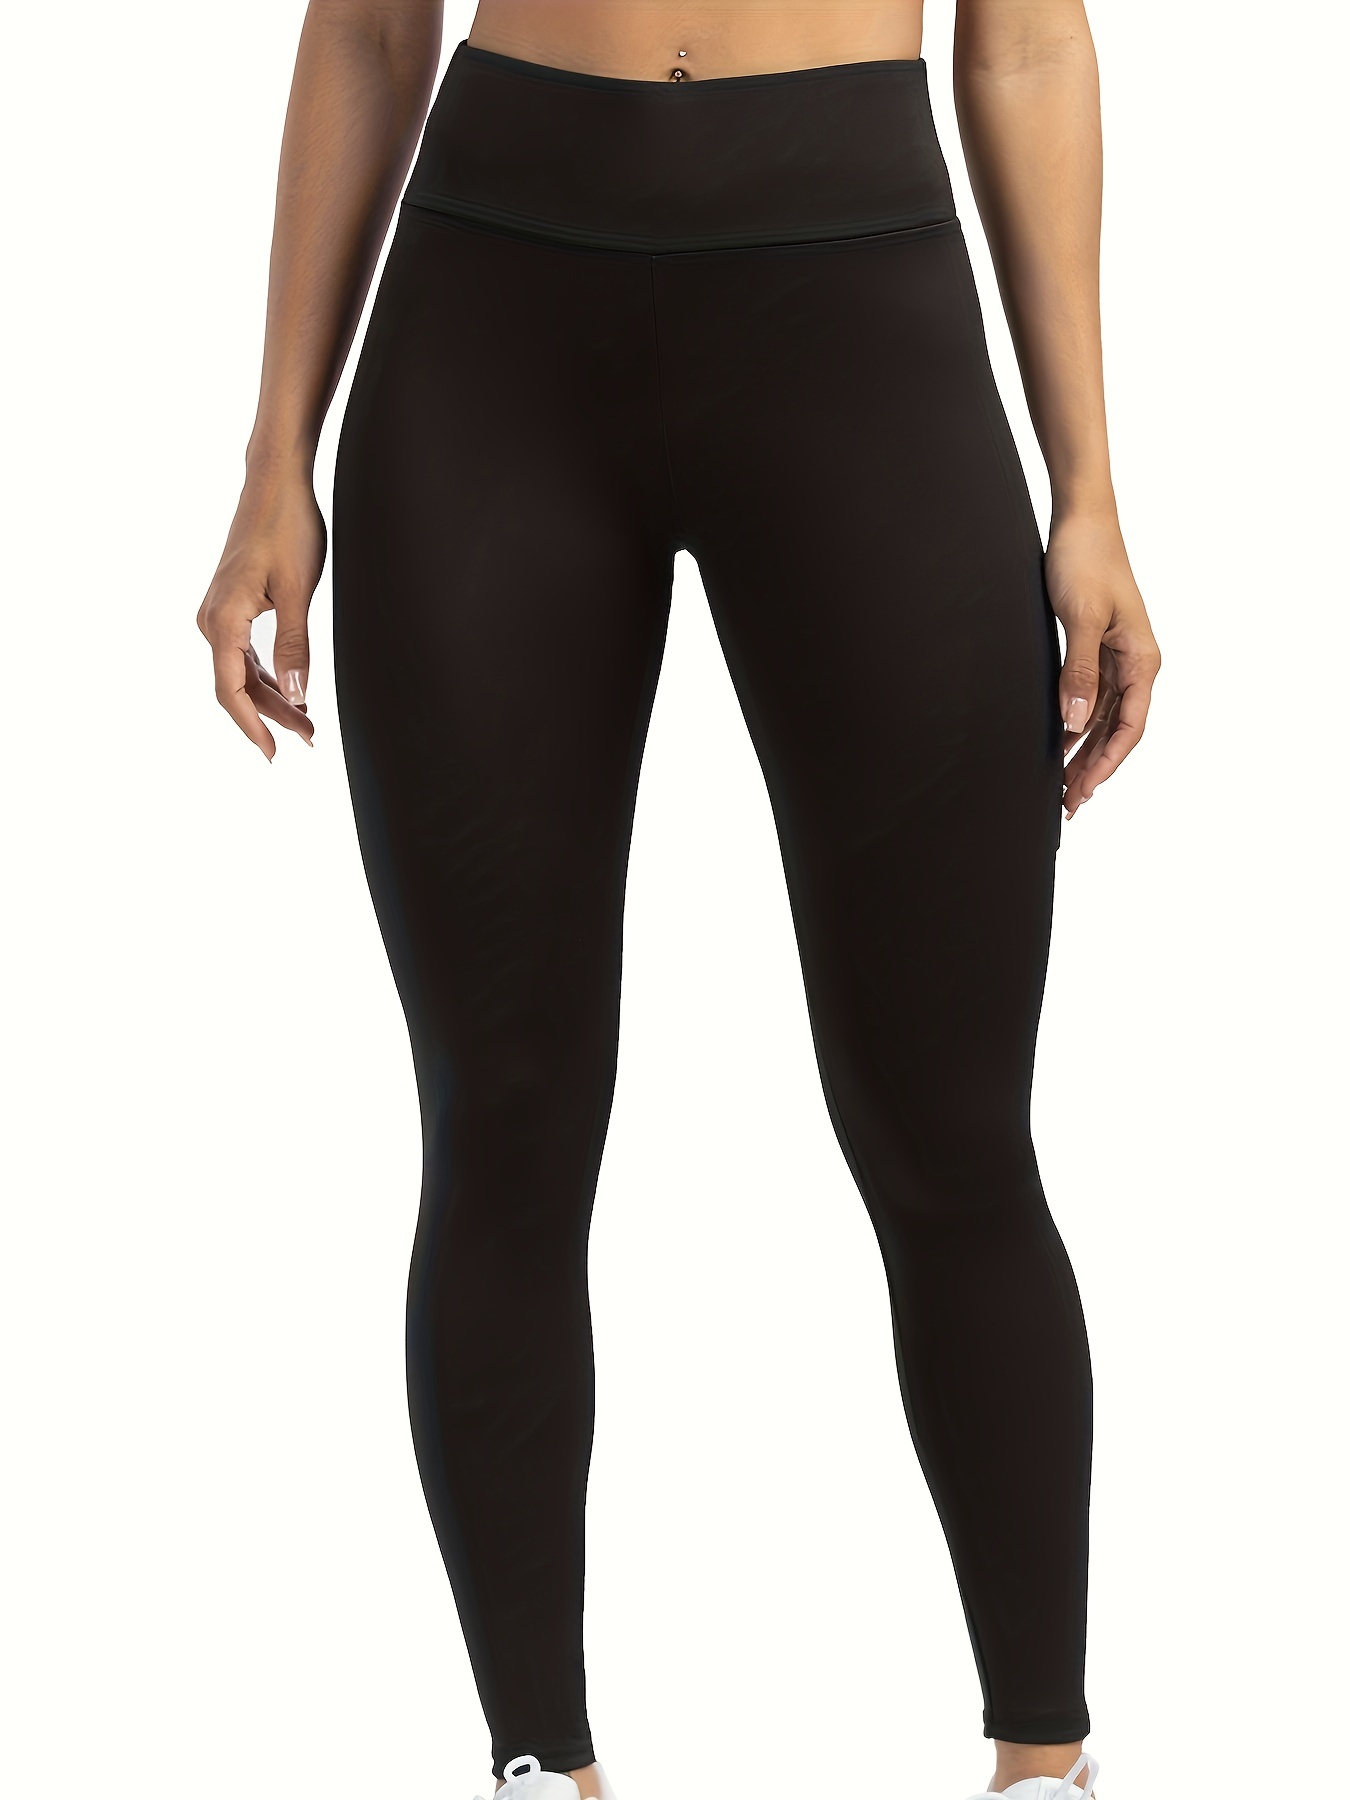 High Waist Solid Color Yoga Align Leggings For Women Full Length Gym  Clothes, Running, Sports, Fitness, And Workout Pants From Luyogastar,  $14.24